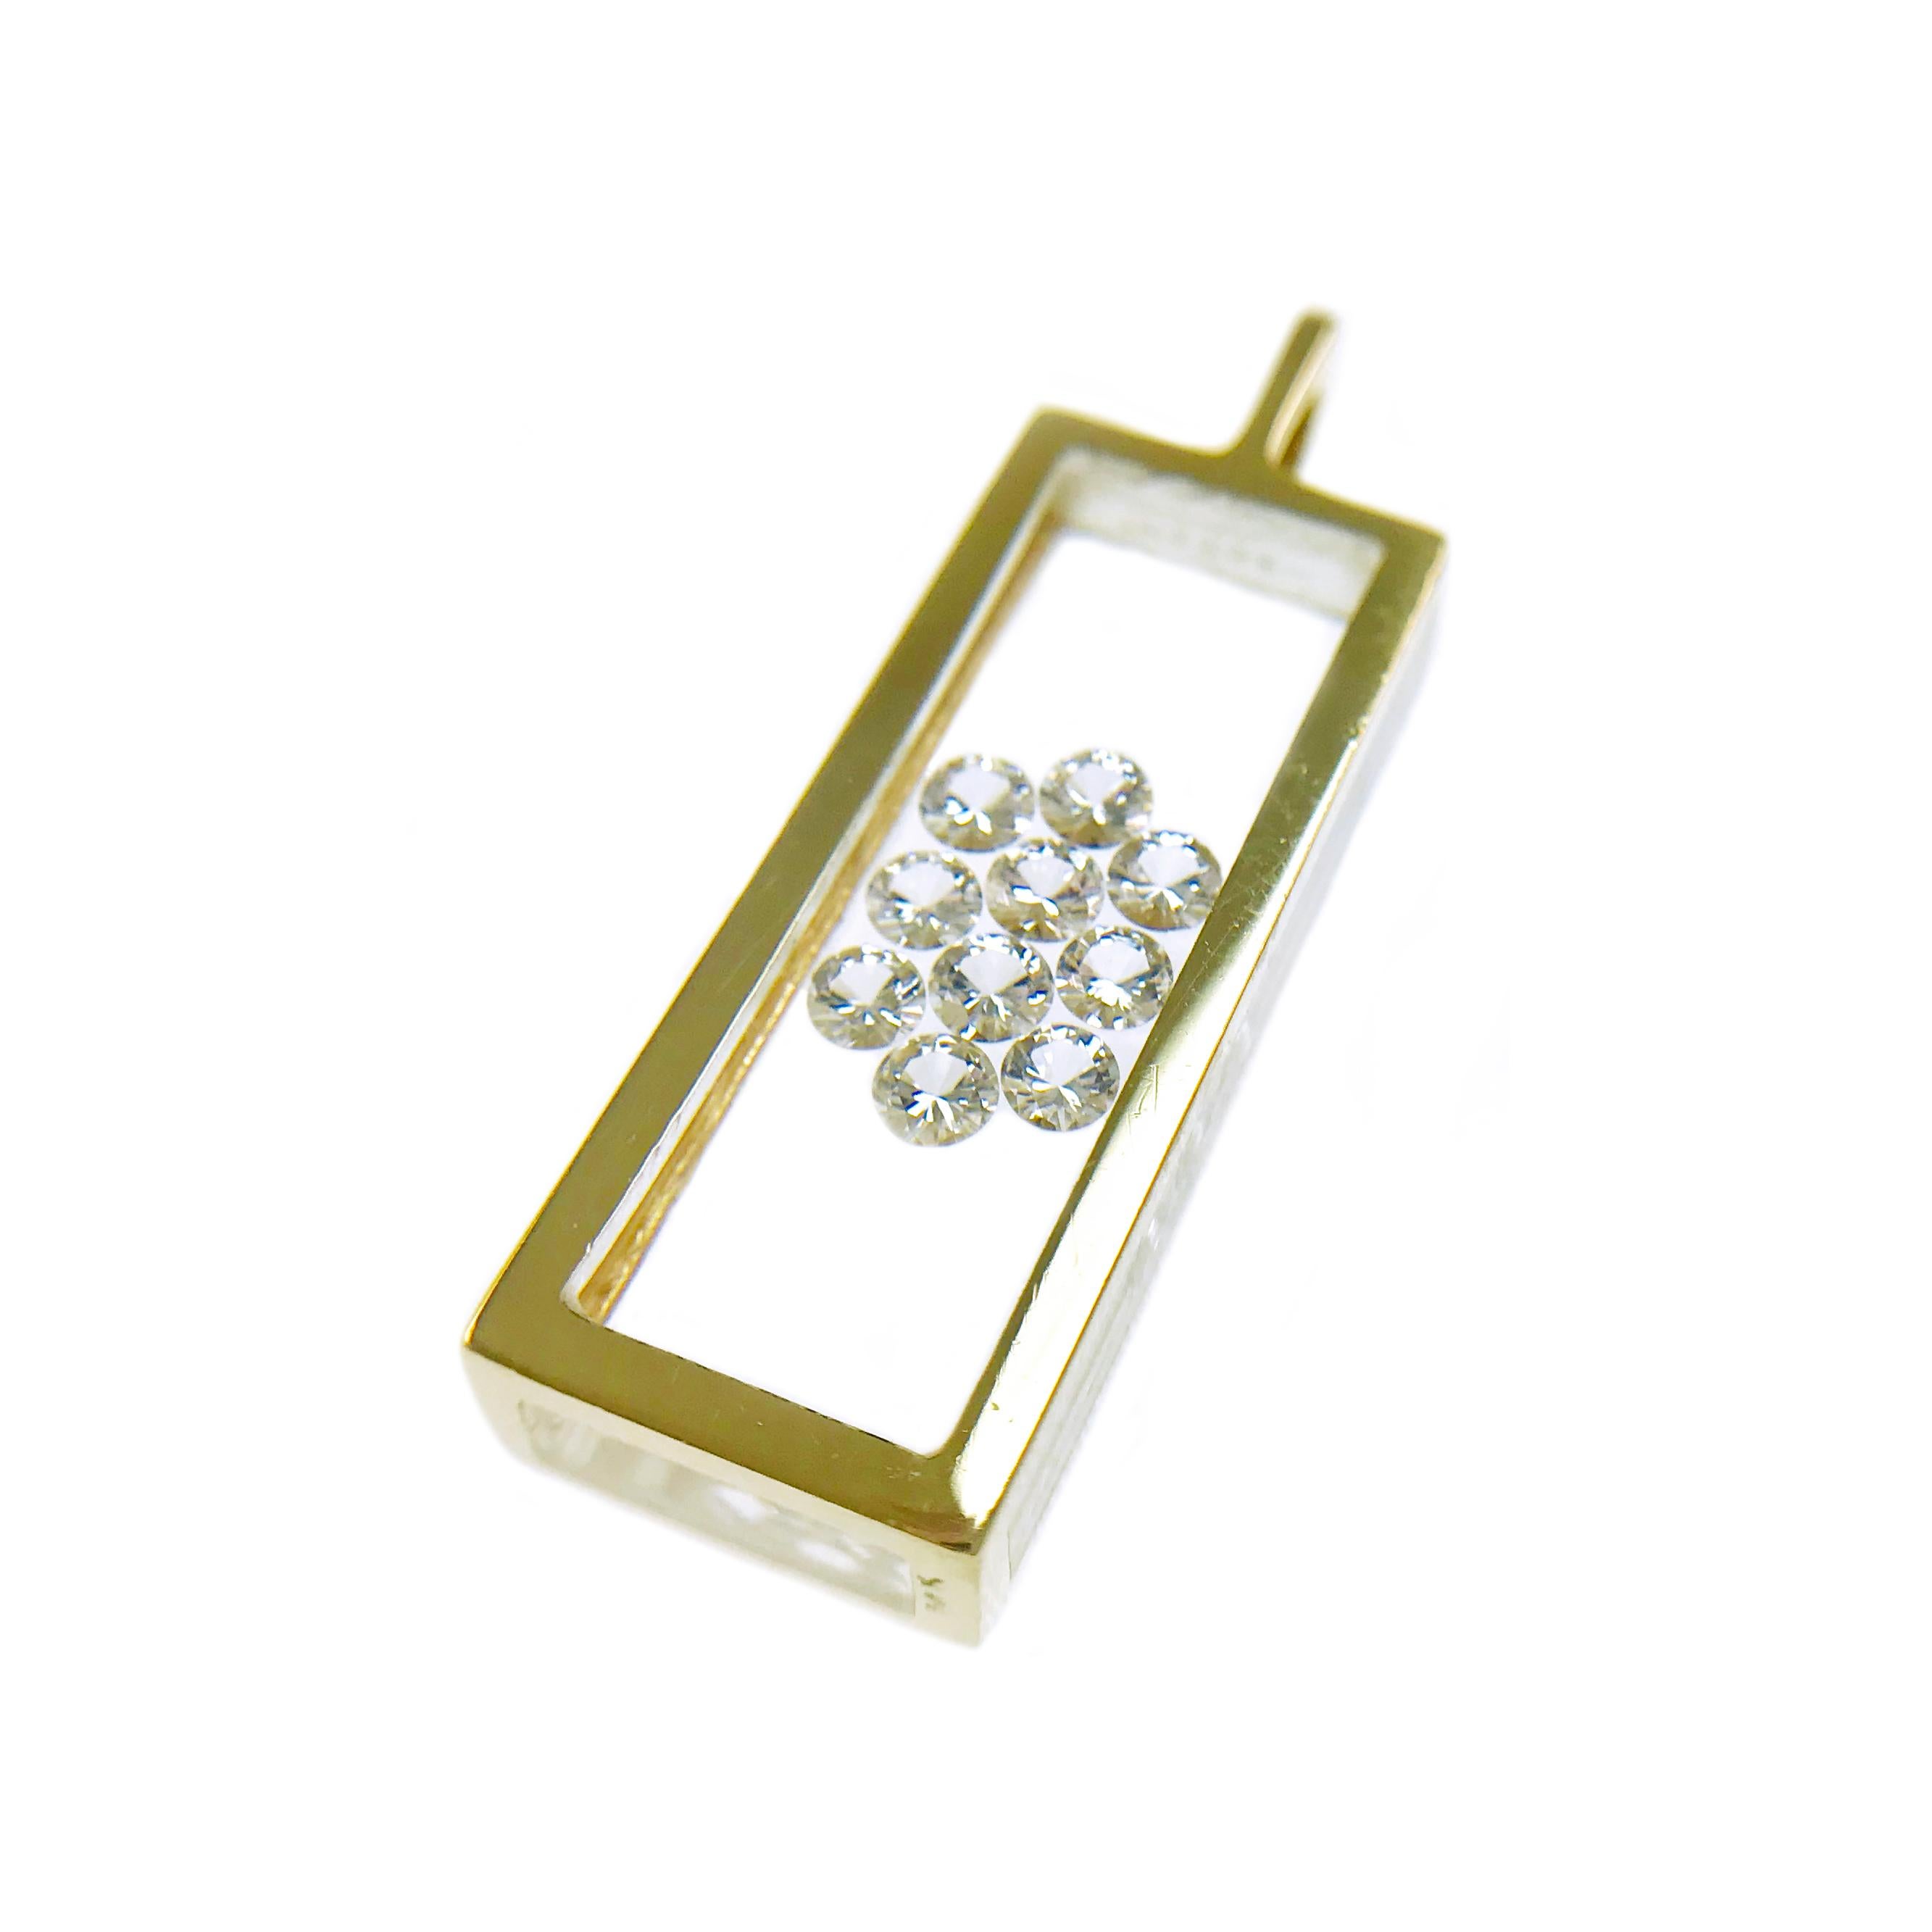 Incogem Floating Ten-Diamond Pendant, 14k Yellow Gold. The pendant is handcrafted of recycled 14k yellow gold. The diamonds are brilliant cut, 58 facets, VS1 in clarity (G.I.A.) and G in color (G.I.A.). Each diamond measuring 3.0mm each, 1.00 carat